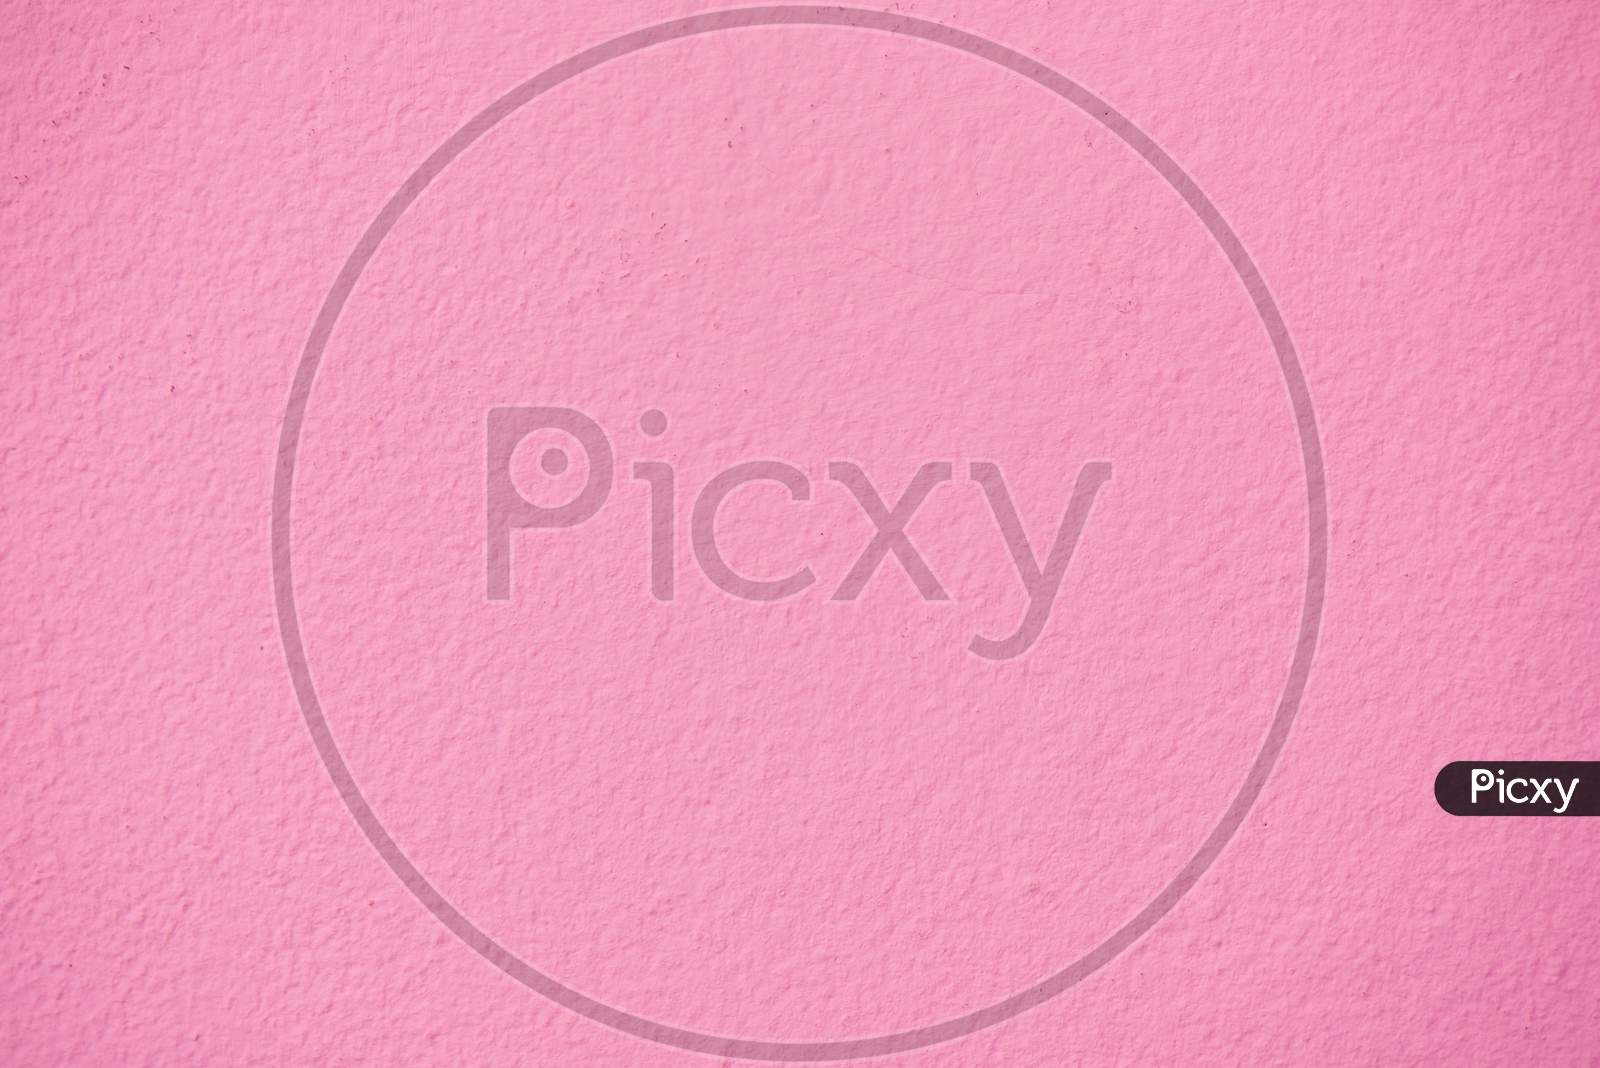 Pink Texture Wallpaper Of Of Wall. Closed Up And Full Of Copyspace. Interior Concept